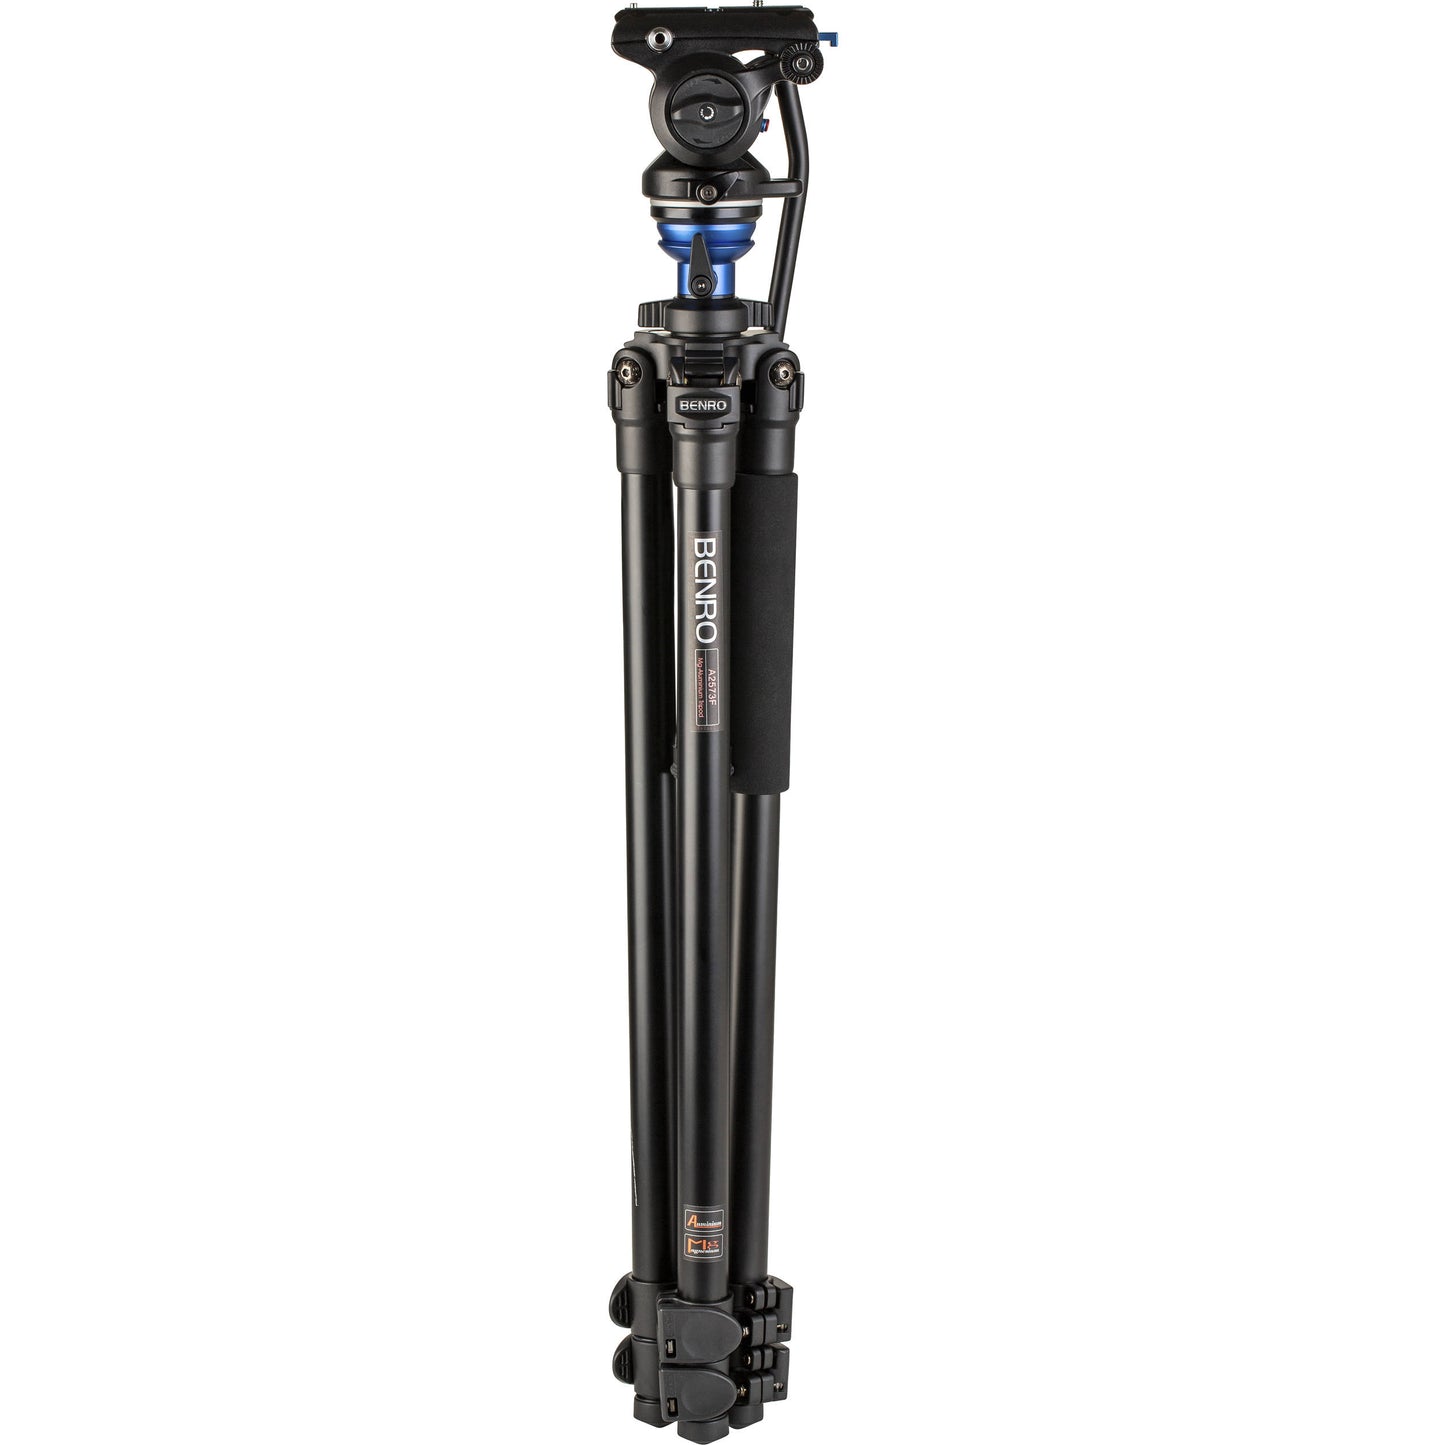 Benro A2573FS4 Aluminum Travel Tripod with S4Pro Fluid Video Head, 4kg Load Capacity, 360 Panning Range, for DSLR Camera